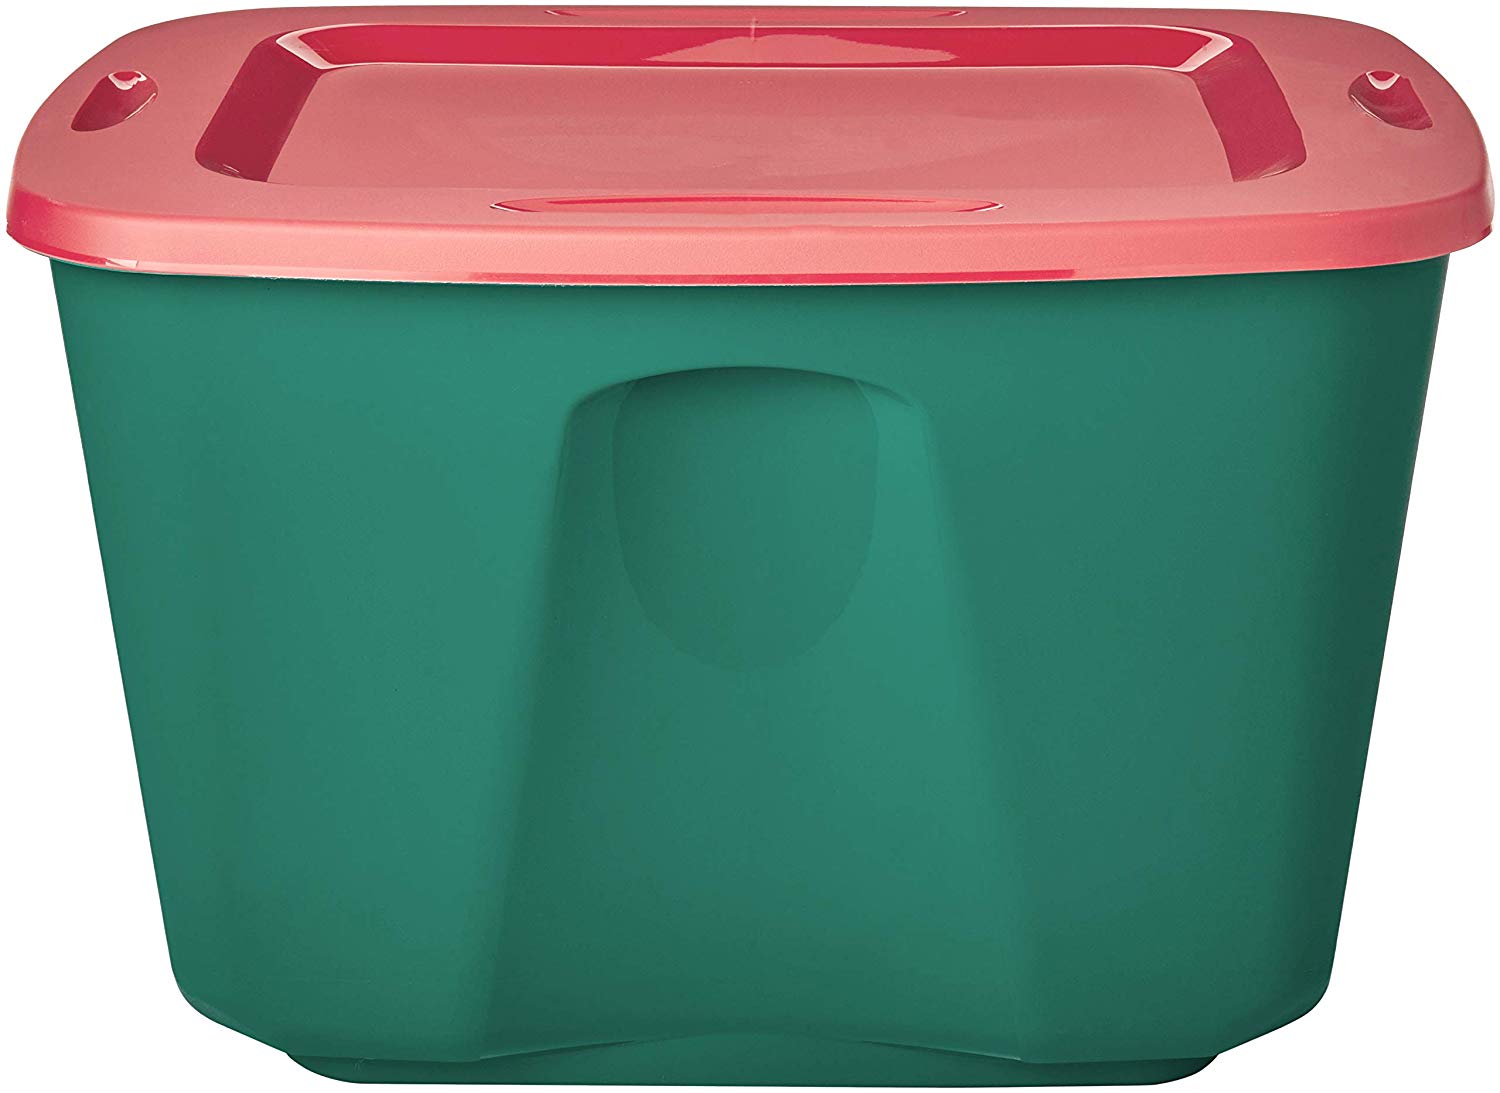 SIMPLYKLEEN 4-Pack Christmas Storage Totes with Lids (Red/Green), 18-Gallon  (72-Quart) Organization Bins, 25.50 x 17.00 x 15.25, Holiday Organizer